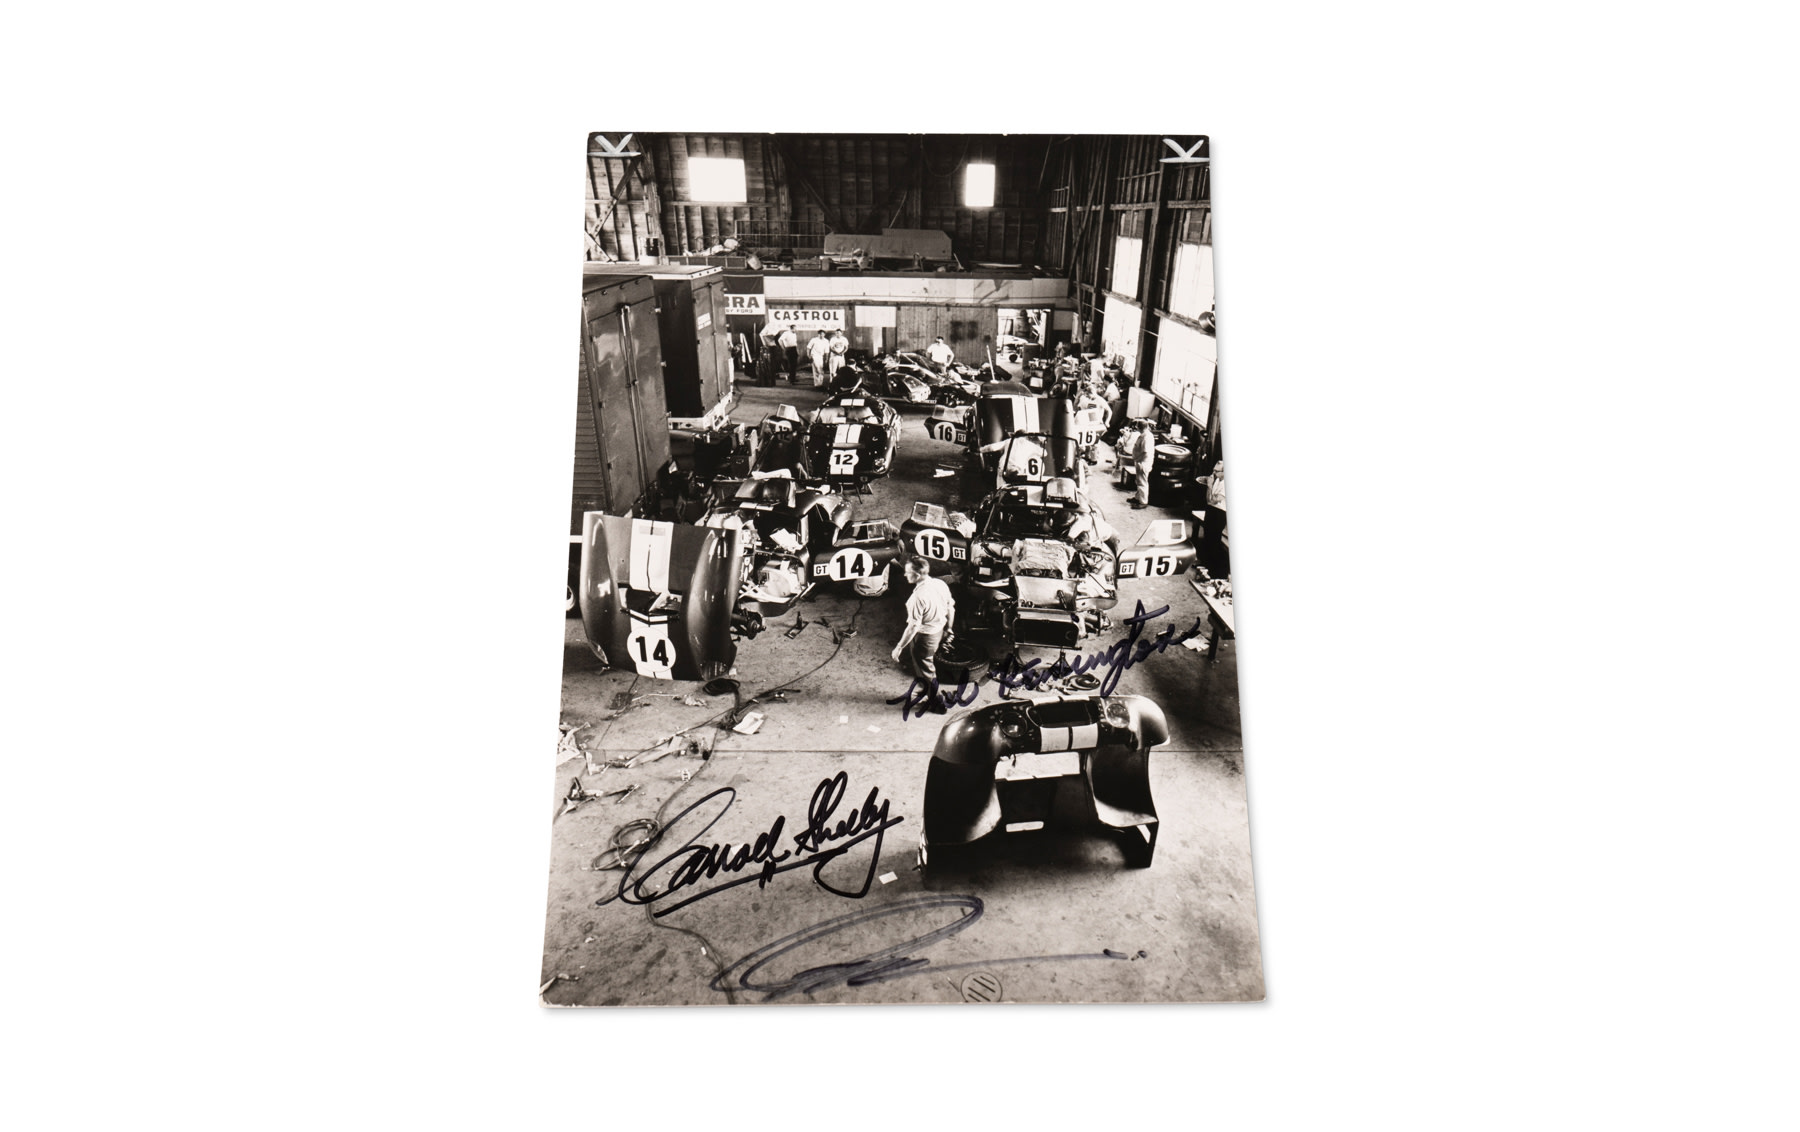 Photograph of the Shelby American Garage at Sebring, Signed by Carroll Shelby, Peter Brock, and Phil Remington